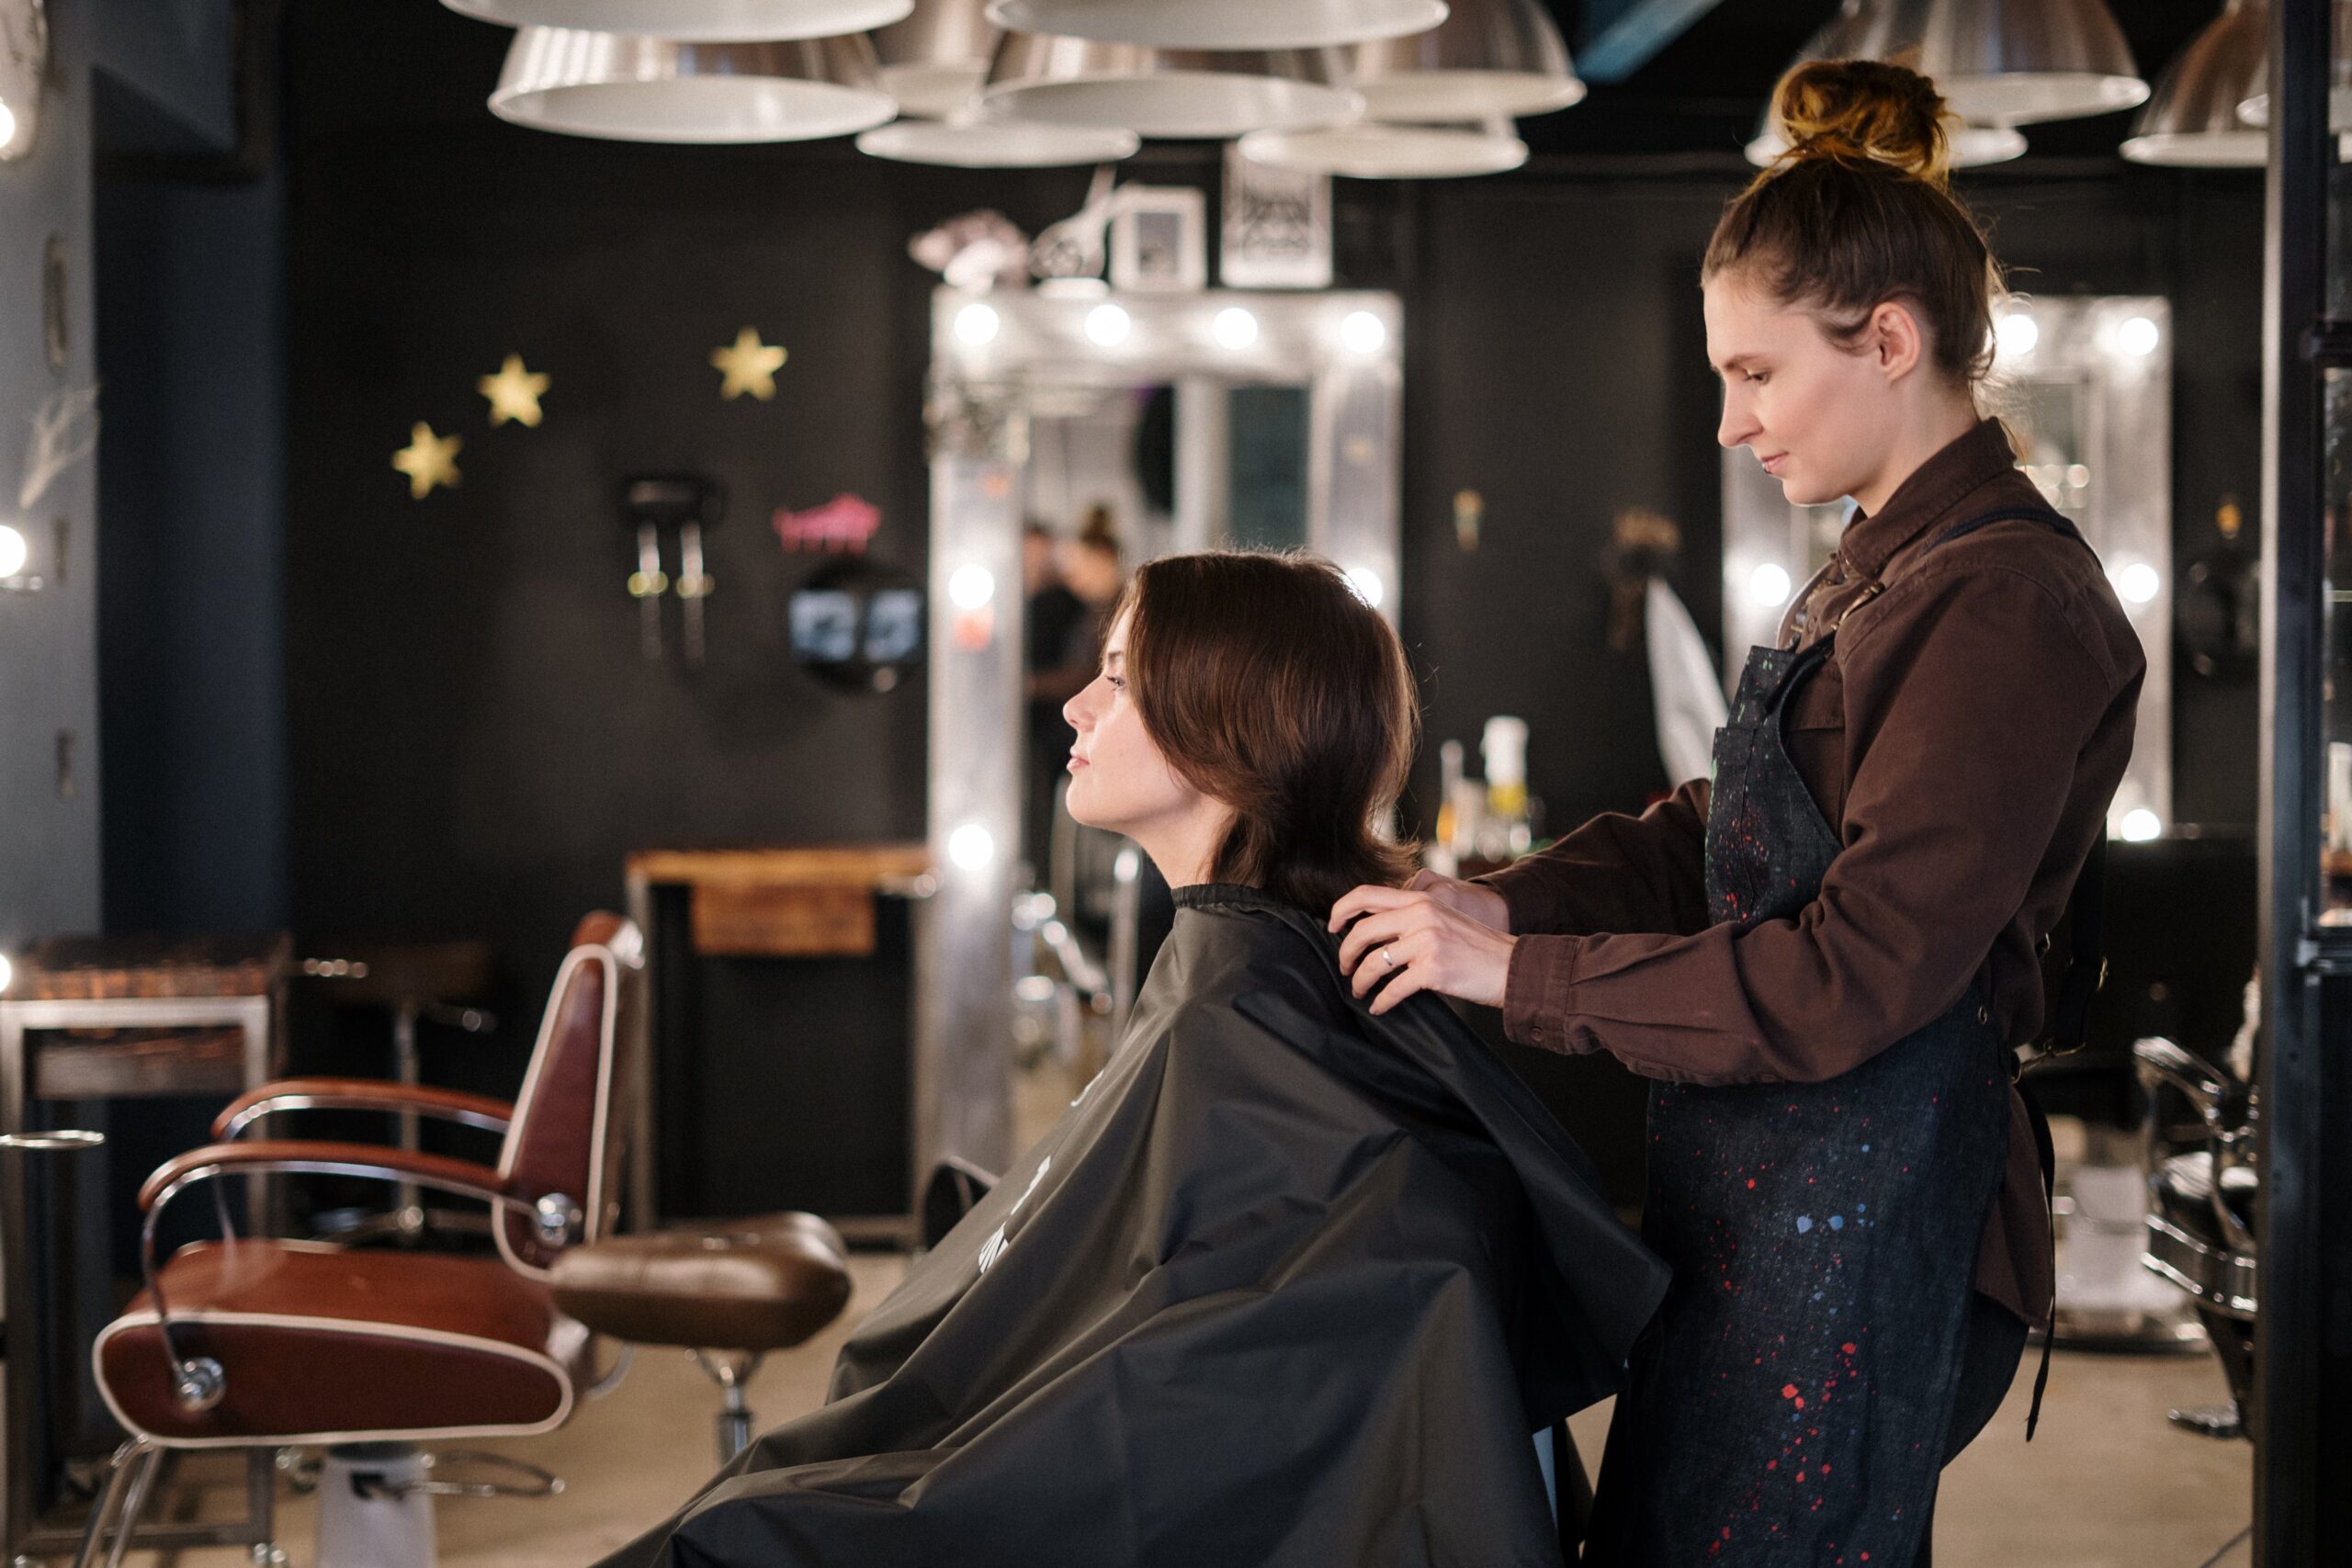 How To Write a Salon Business Plan